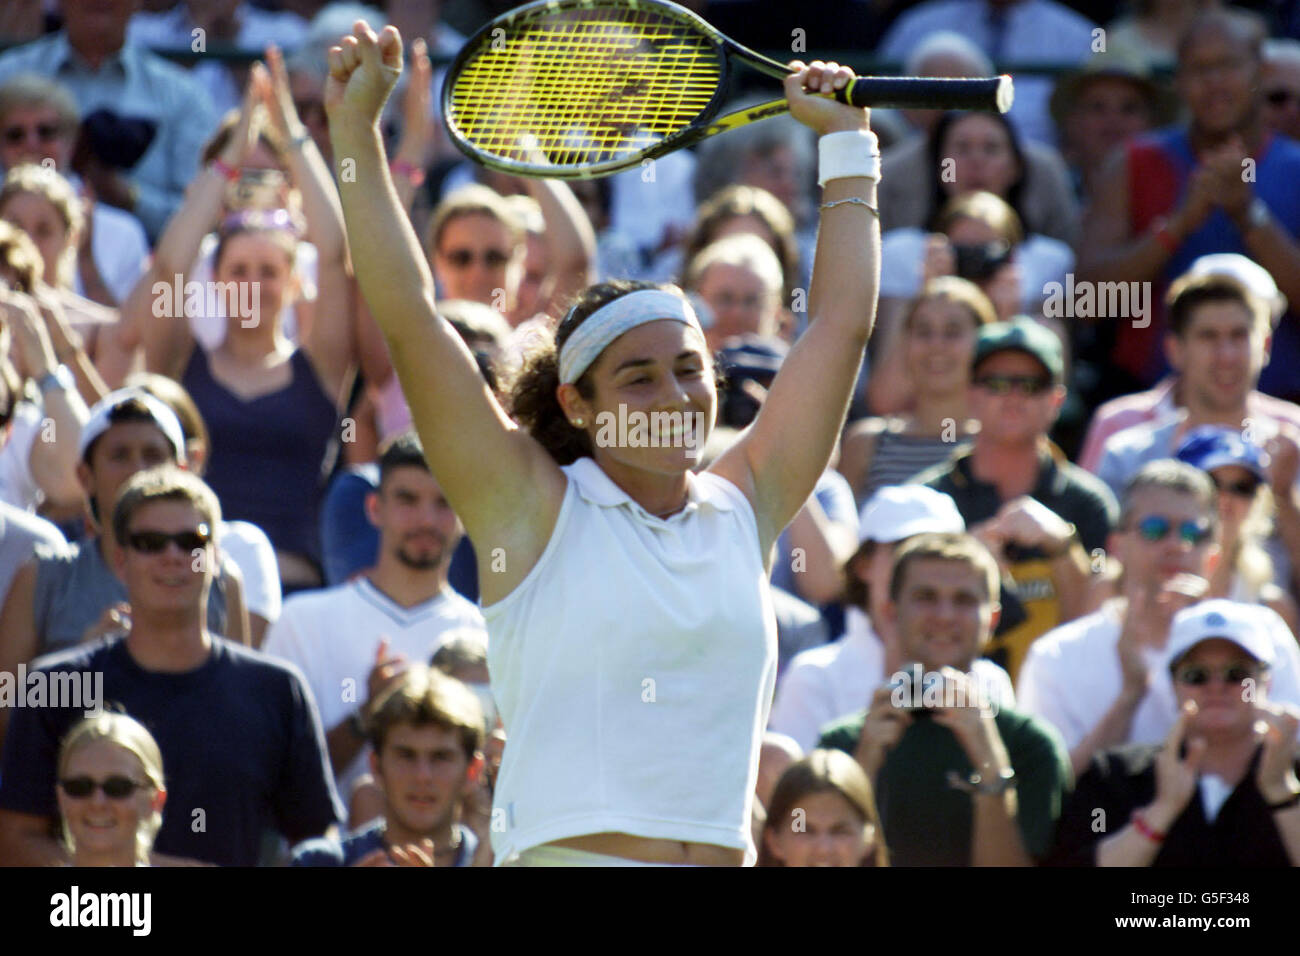 Spain's Virginia Ruano Pascual celebrates after beating Switzerland's Martina Hingis in the First Round match of the Lawn Tennis Championships at Wimbledon, London. Stock Photo